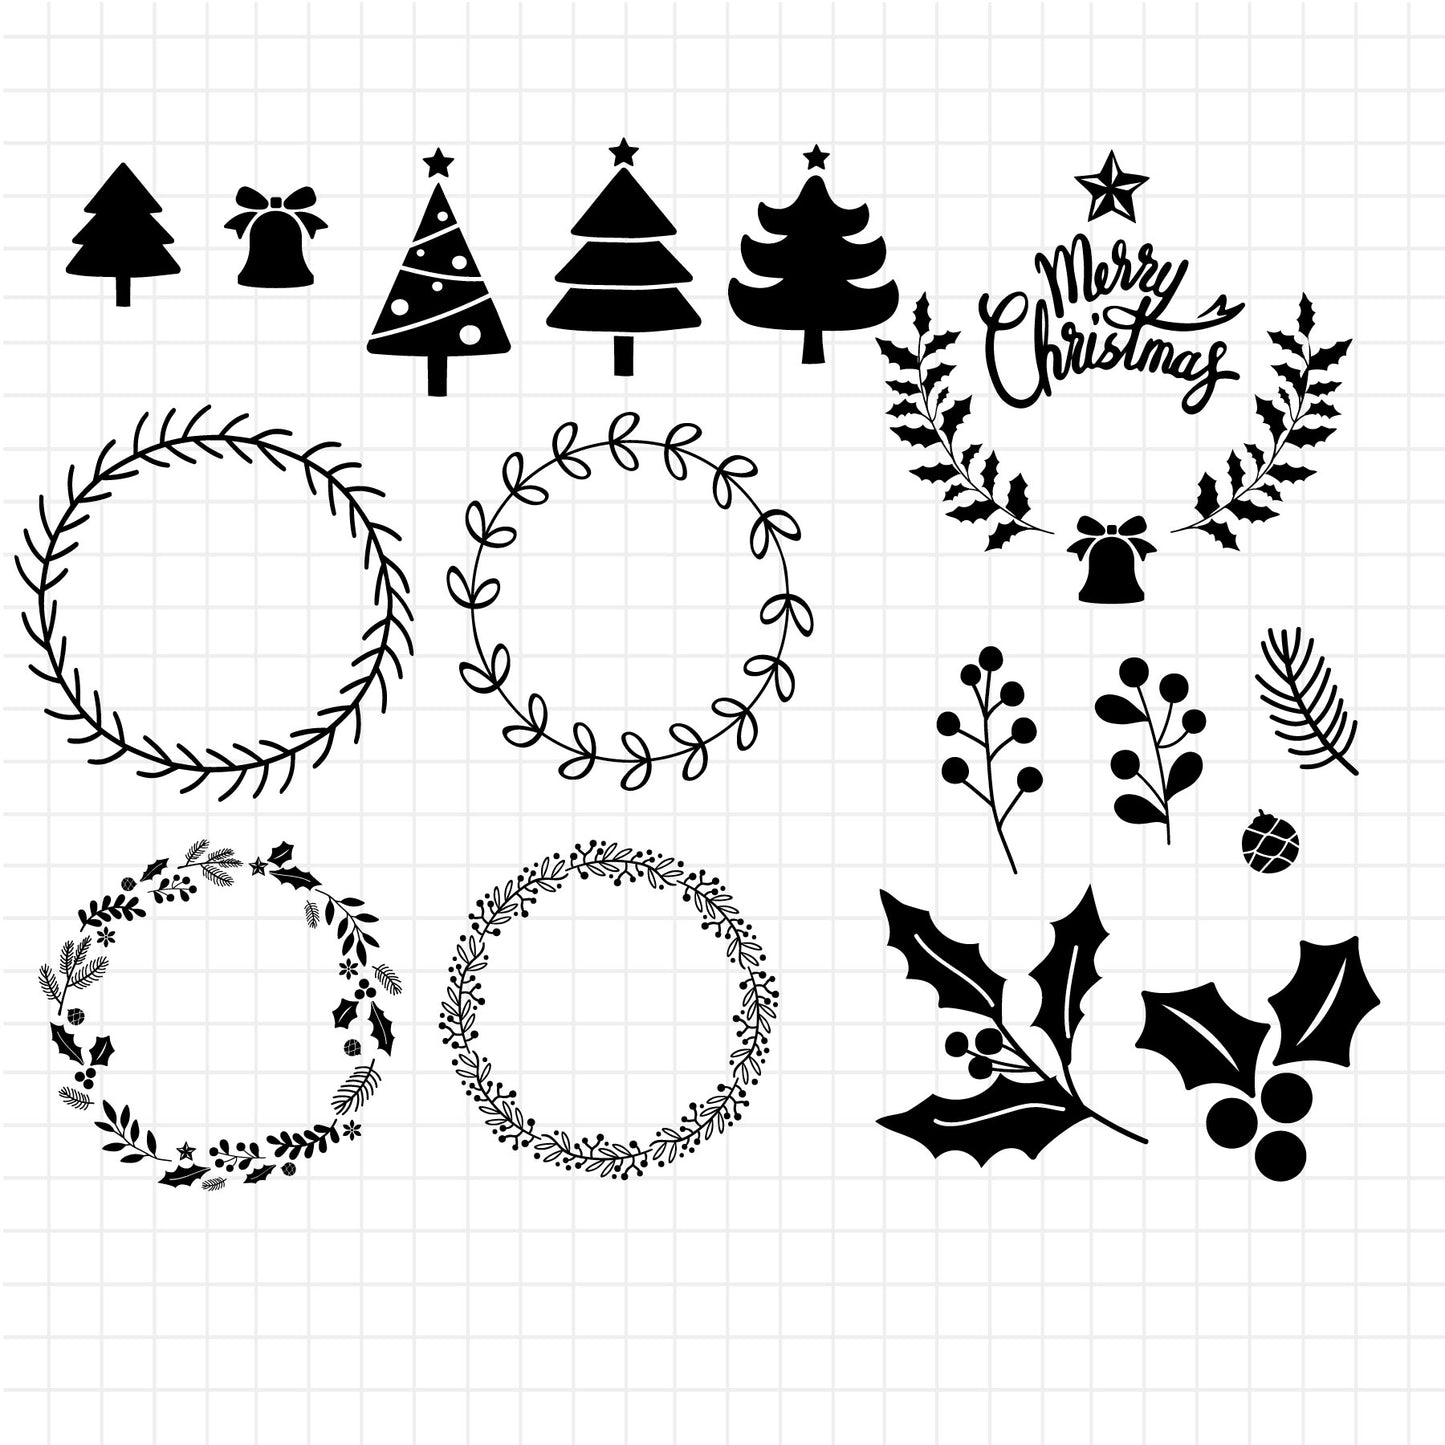 COD1405 - Christmas Clipart/Snowflake Clipart /SVG/DXF/winter Clipart/holiday printable/scrapbook cliparts/Commercial use